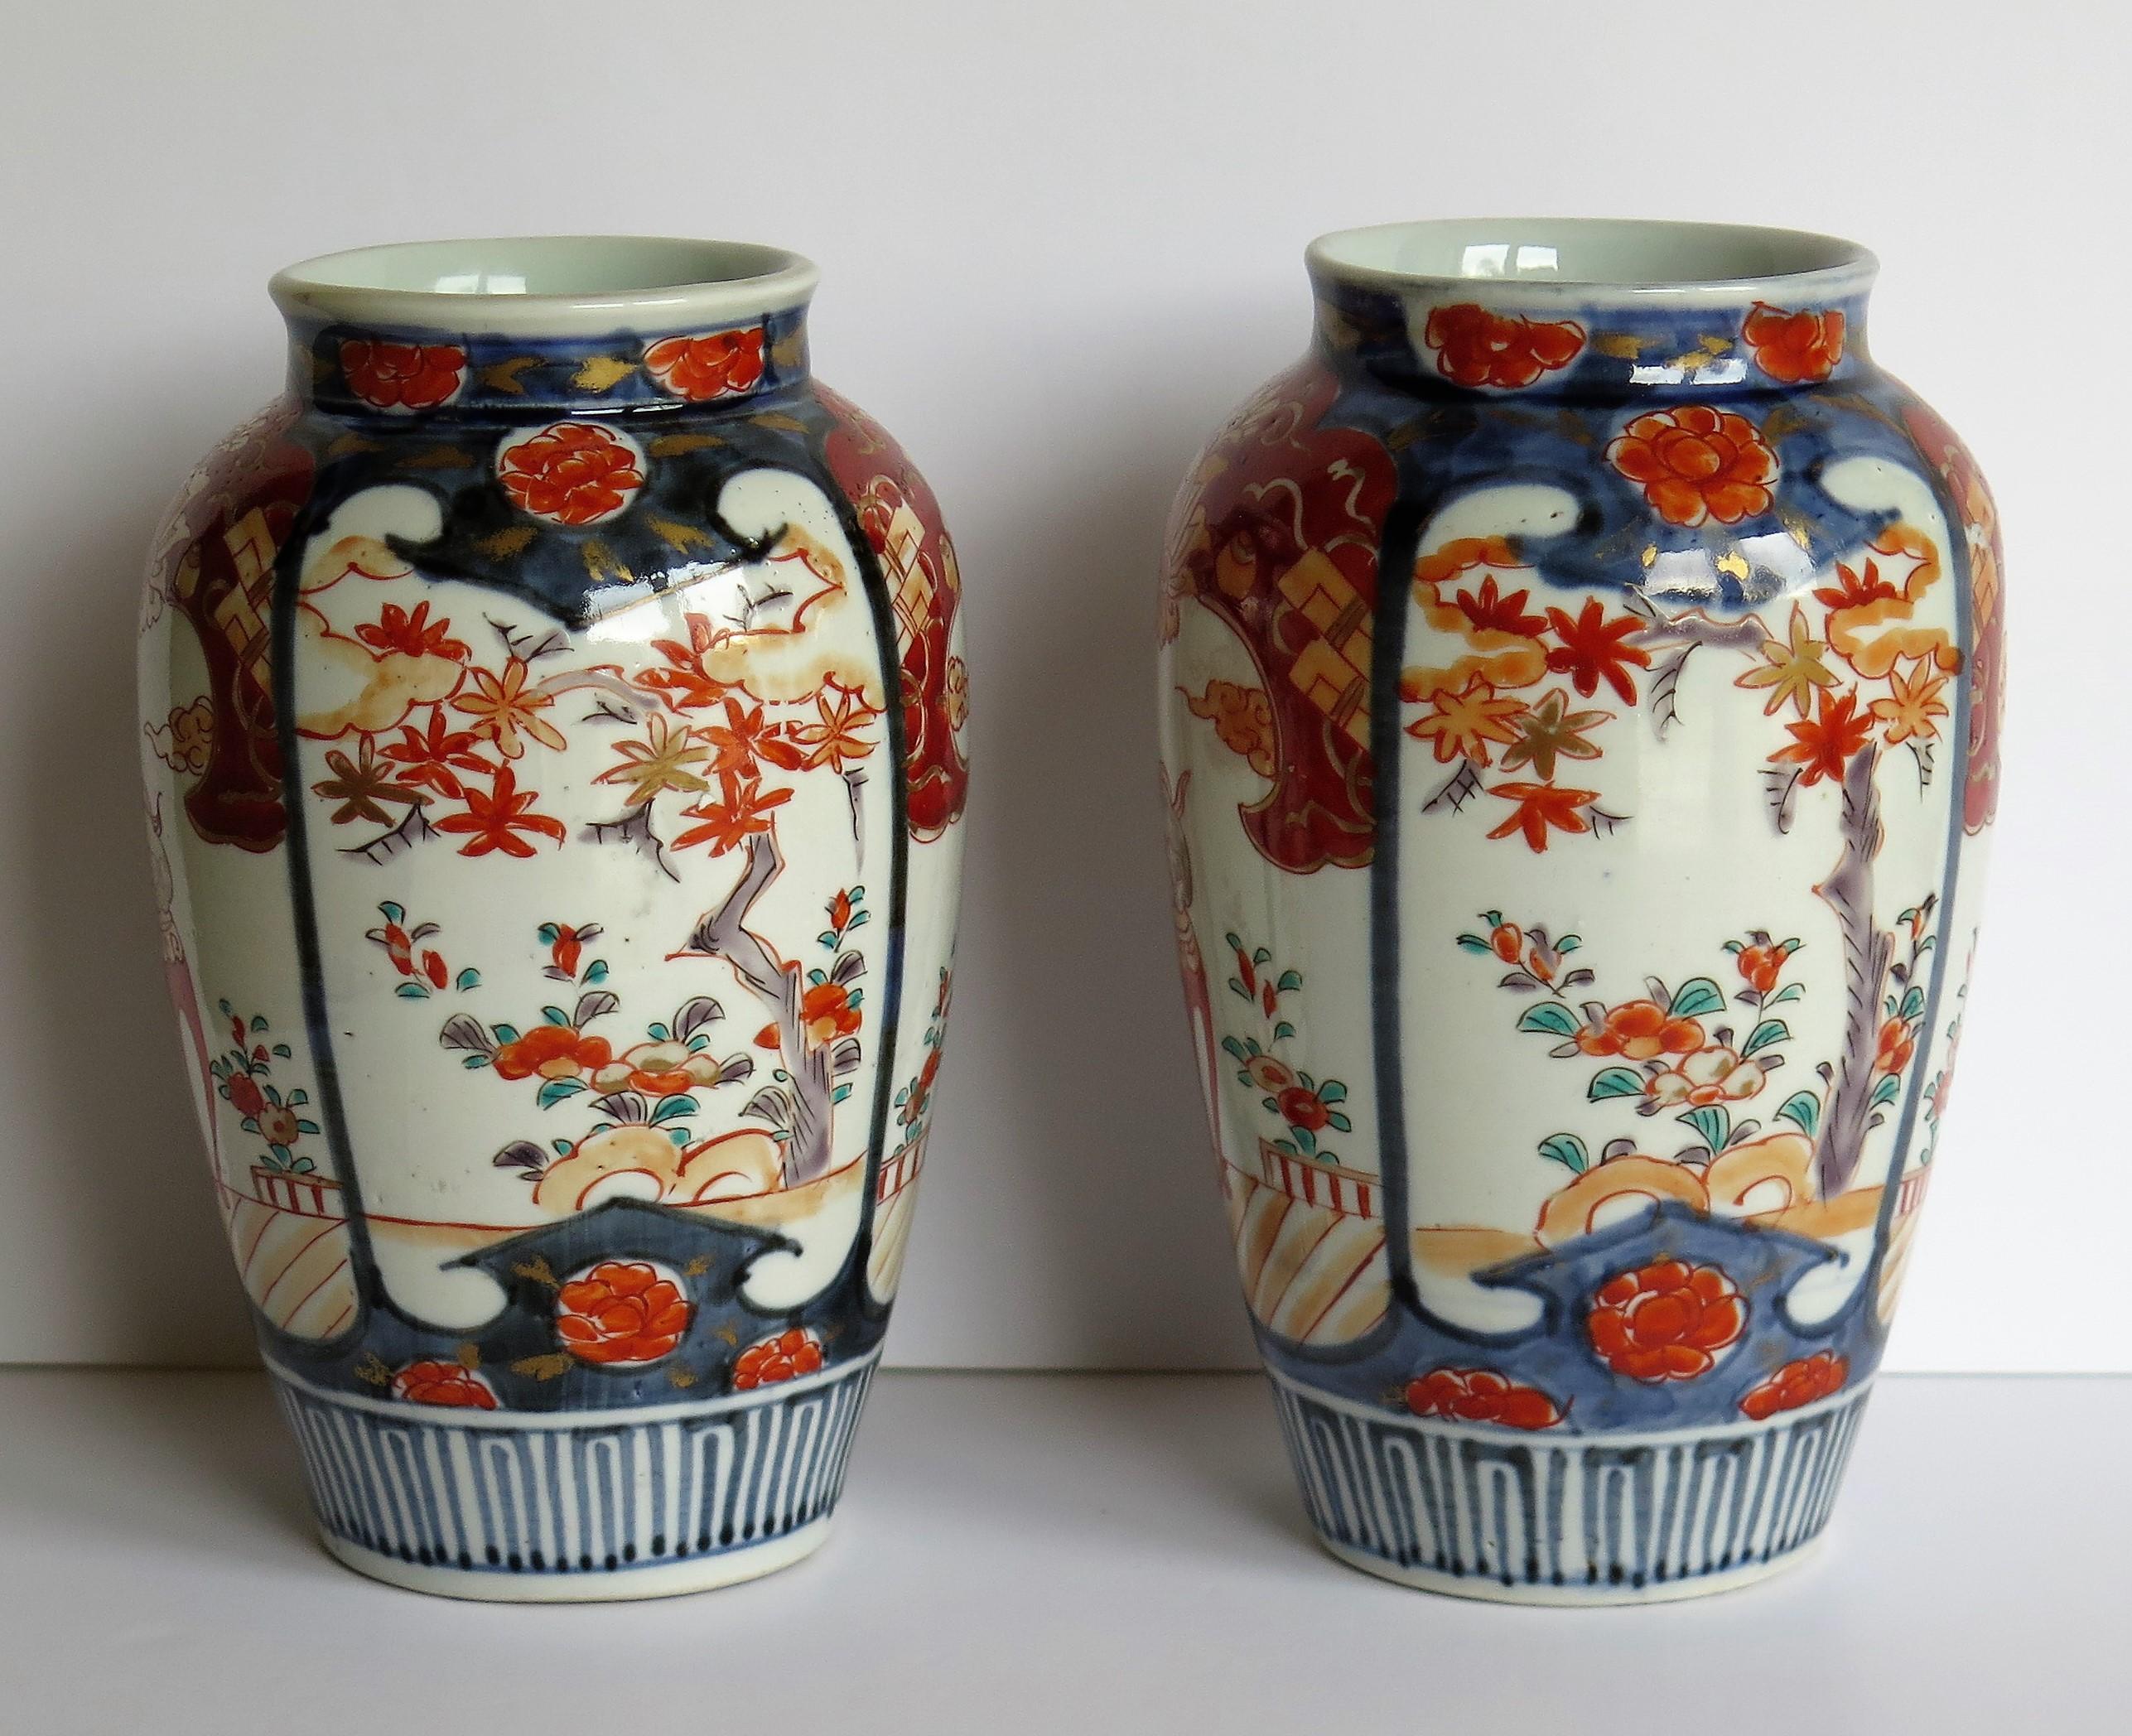 19th Century Pair of Japanese Porcelain Vases Hand Painted, Meiji Period, circa 1880